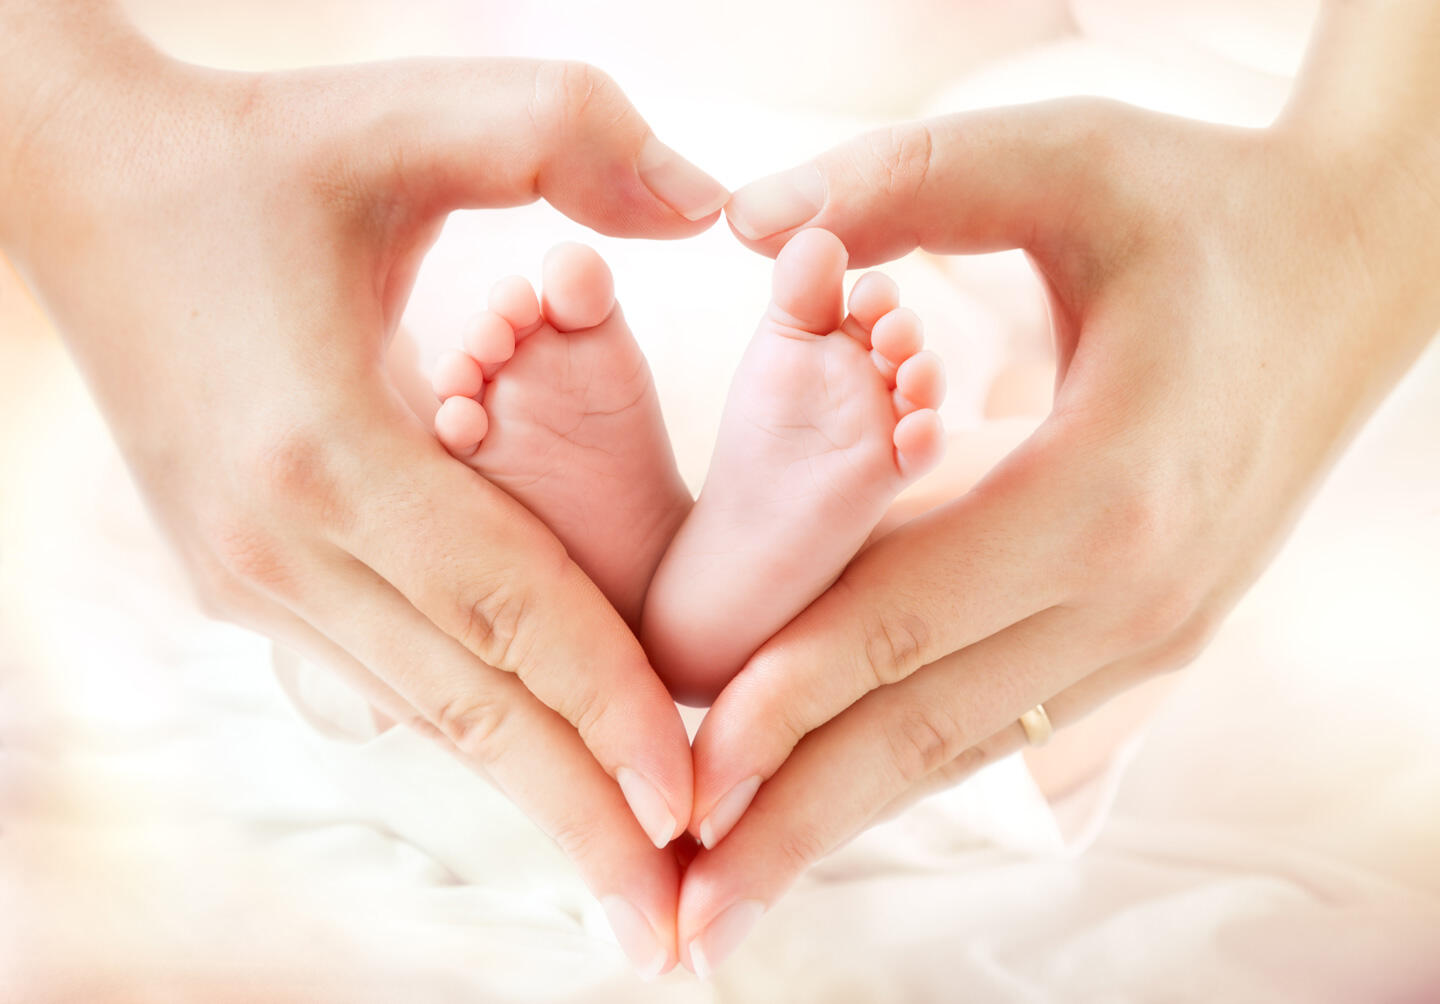 Hands forming a heart around a baby's feet, symbolizing parental love and care at the Baby and Me fair in Geneva.